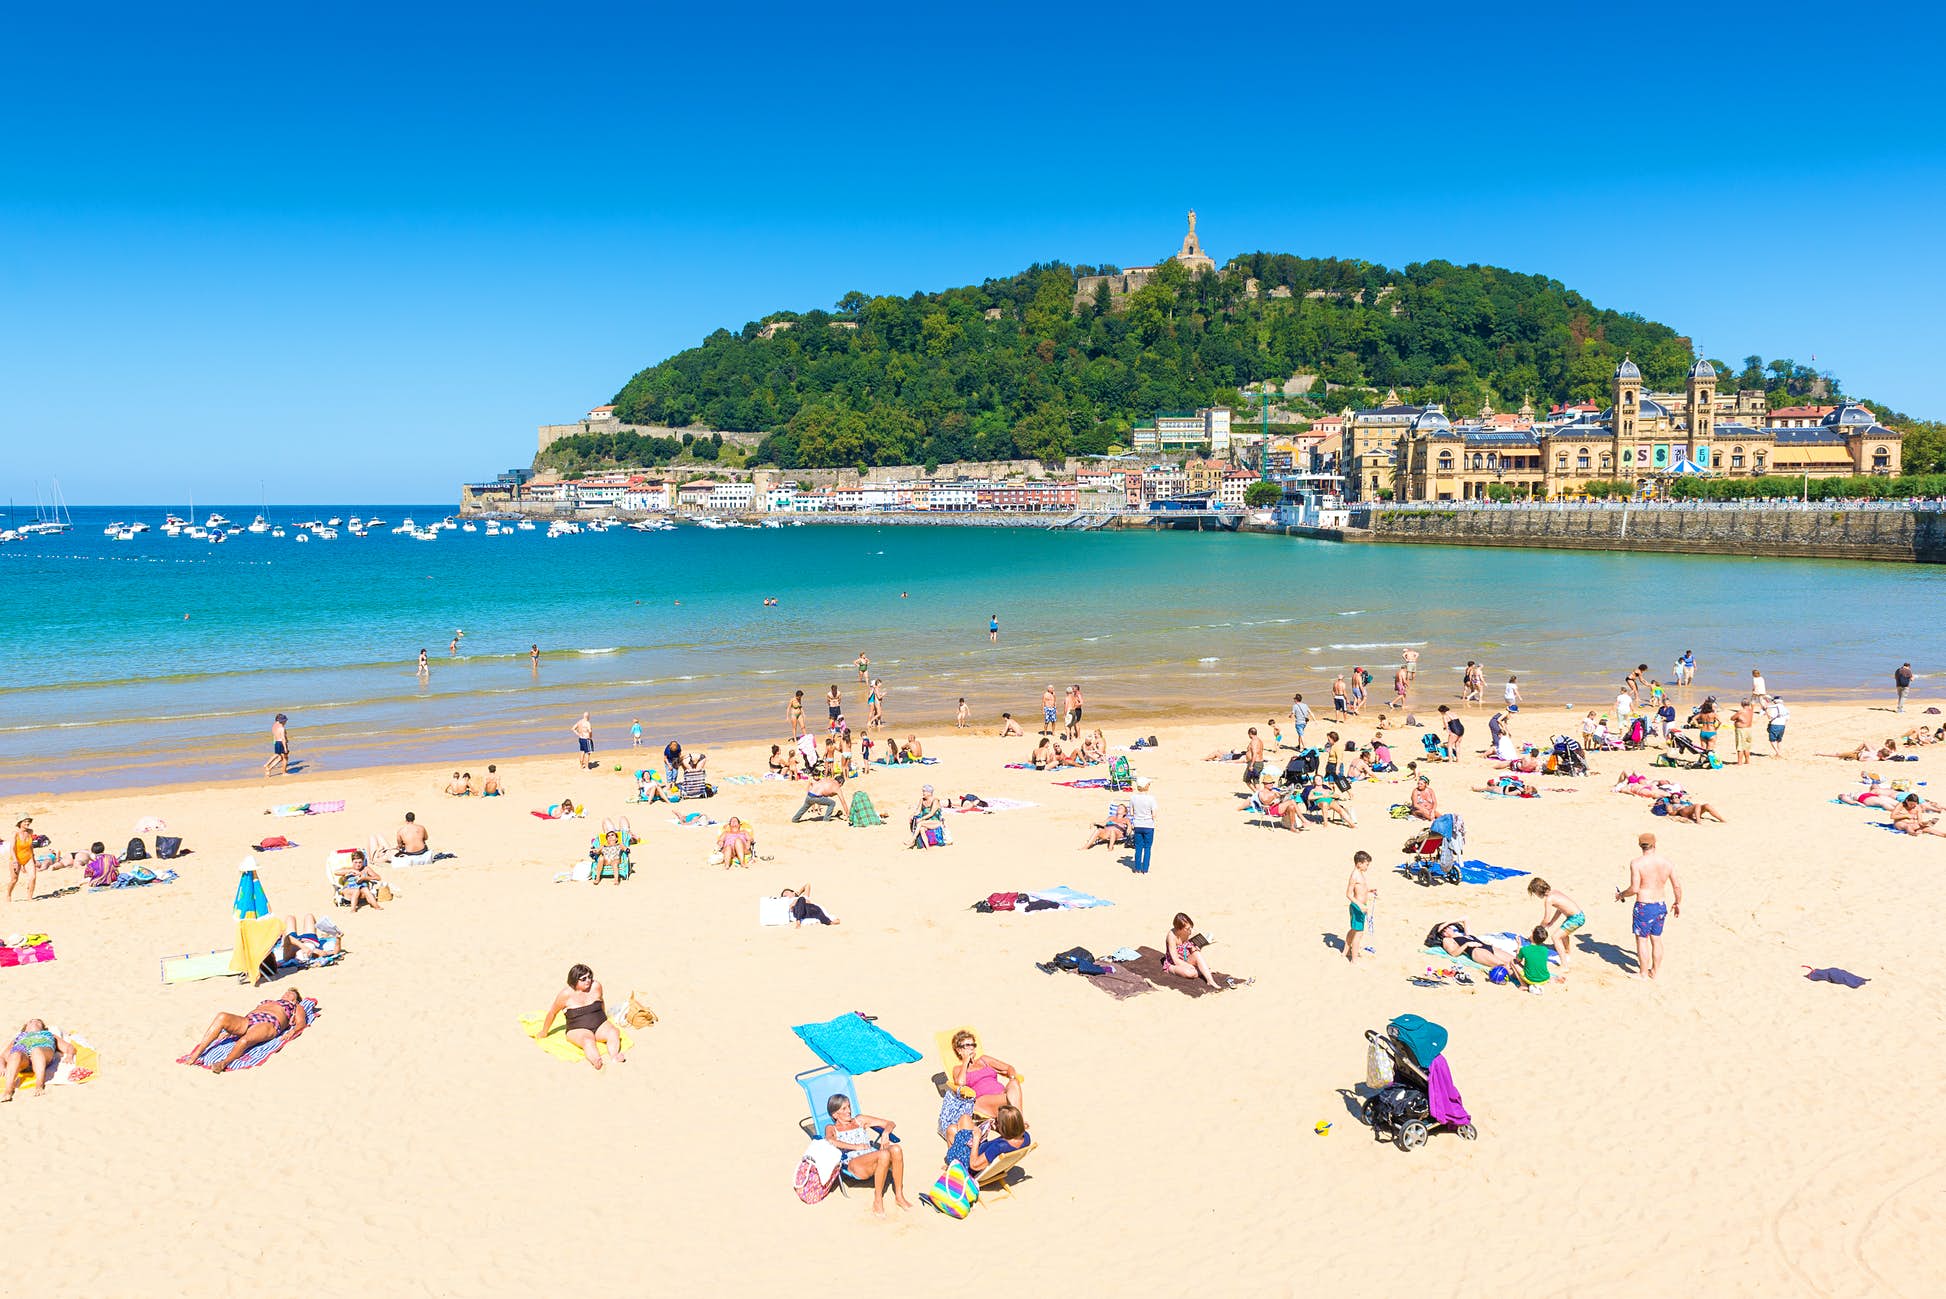 New social distancing measures will apply to beaches and parks ©Alberto Loyo/Shutterstock